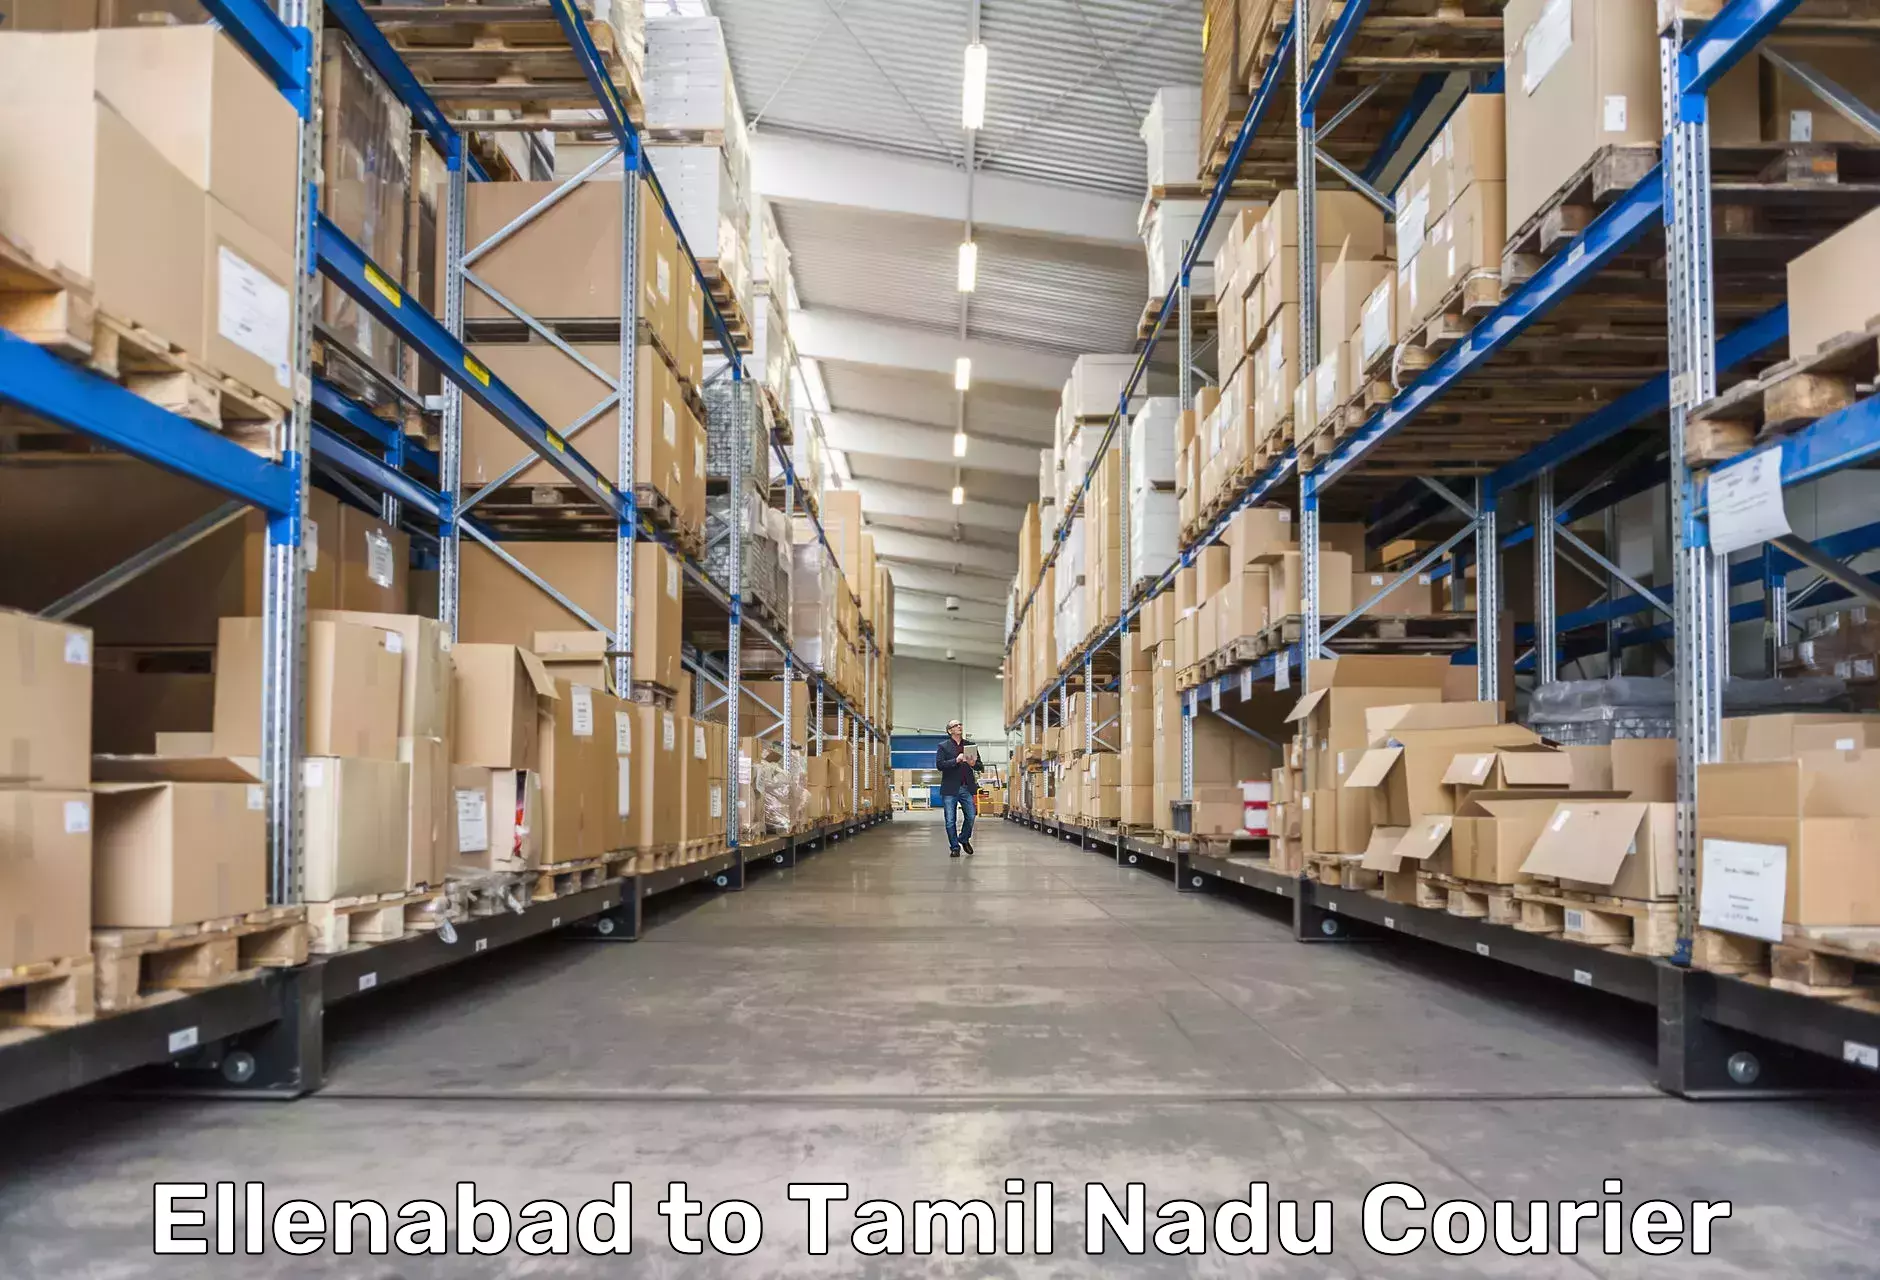 Comprehensive shipping network Ellenabad to Thanjavur